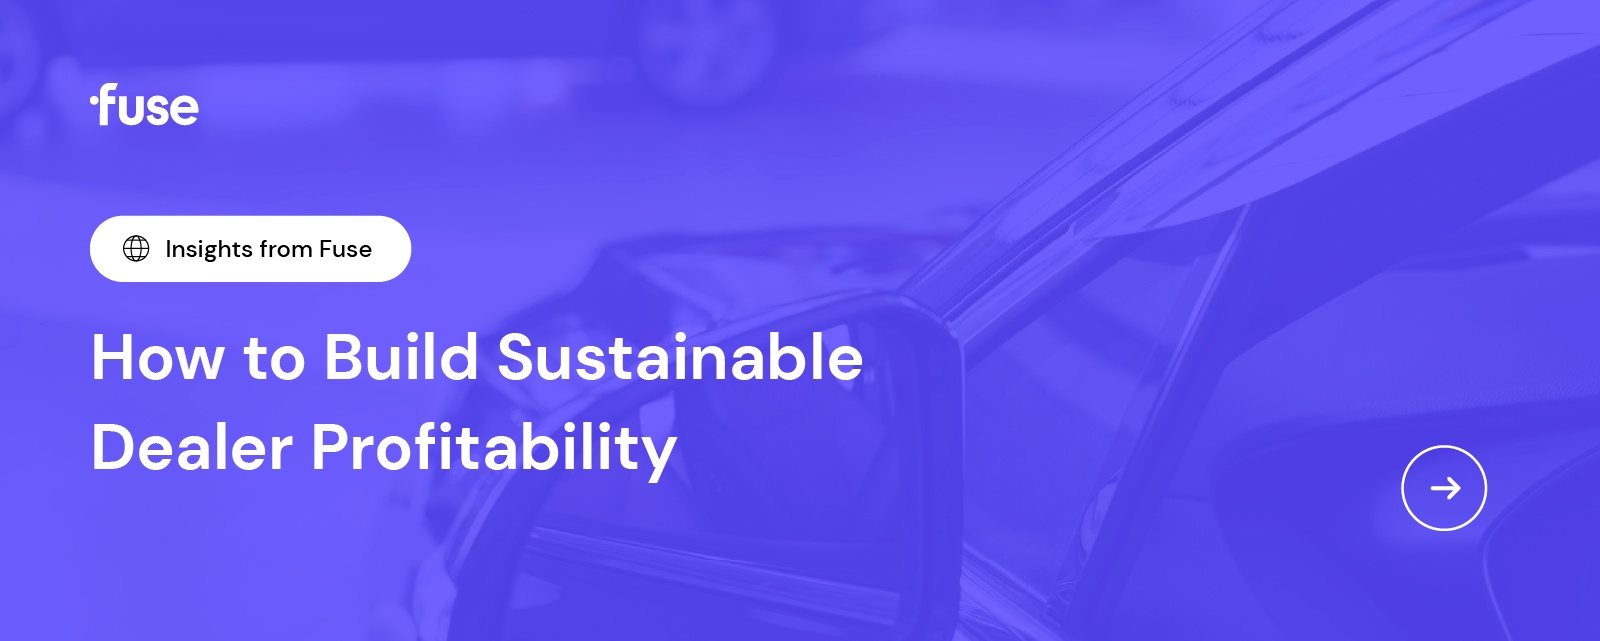 Insights: How to Build Sustainable Dealer Profitability